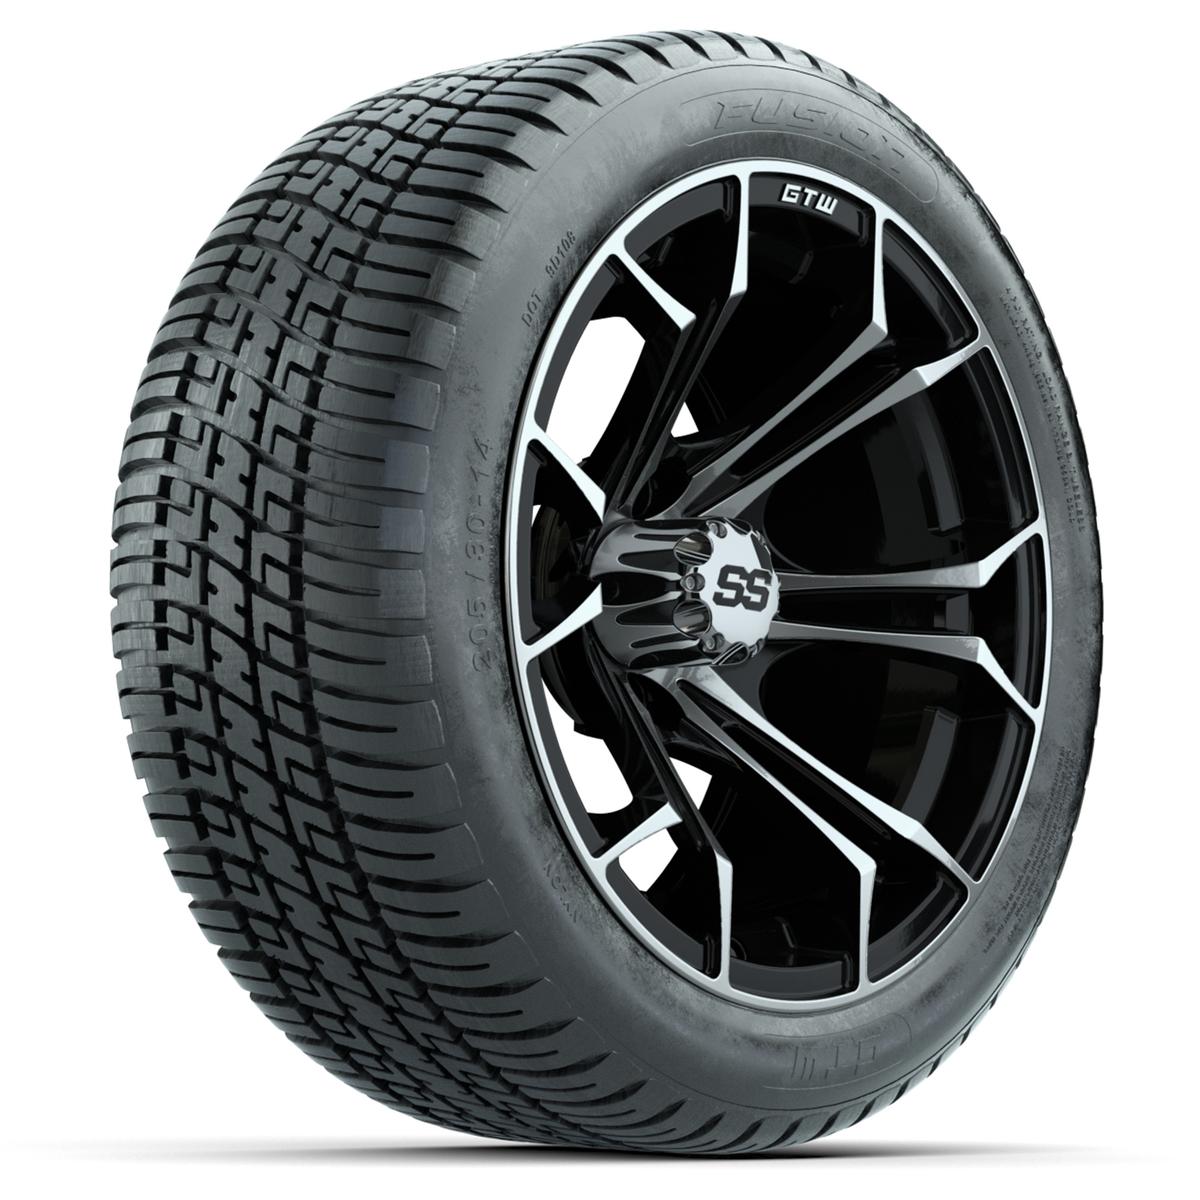 GTW Spyder Machined/Black 14 in Wheels with 205/30-14 Fusion Street Tires – Full Set